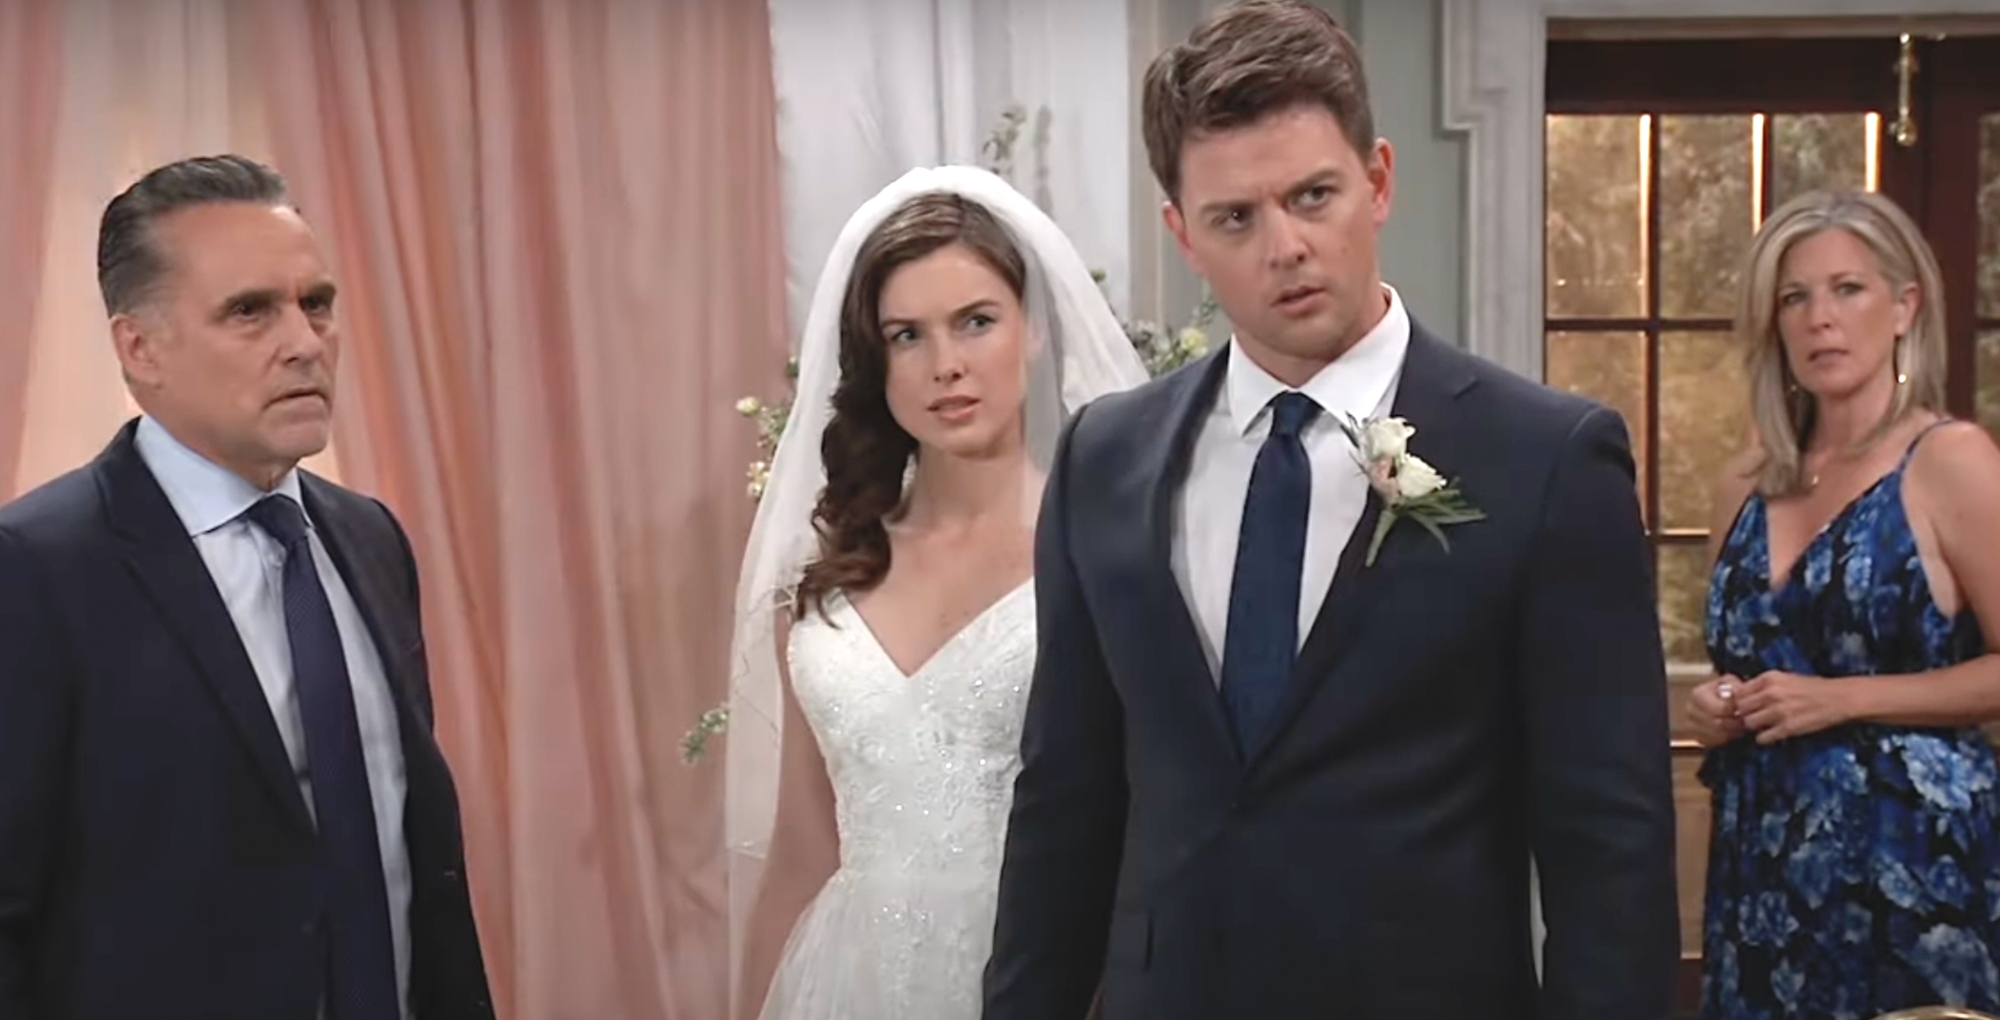 general hospital spoilers for april 27, 2023, has willow ready to marry michael.